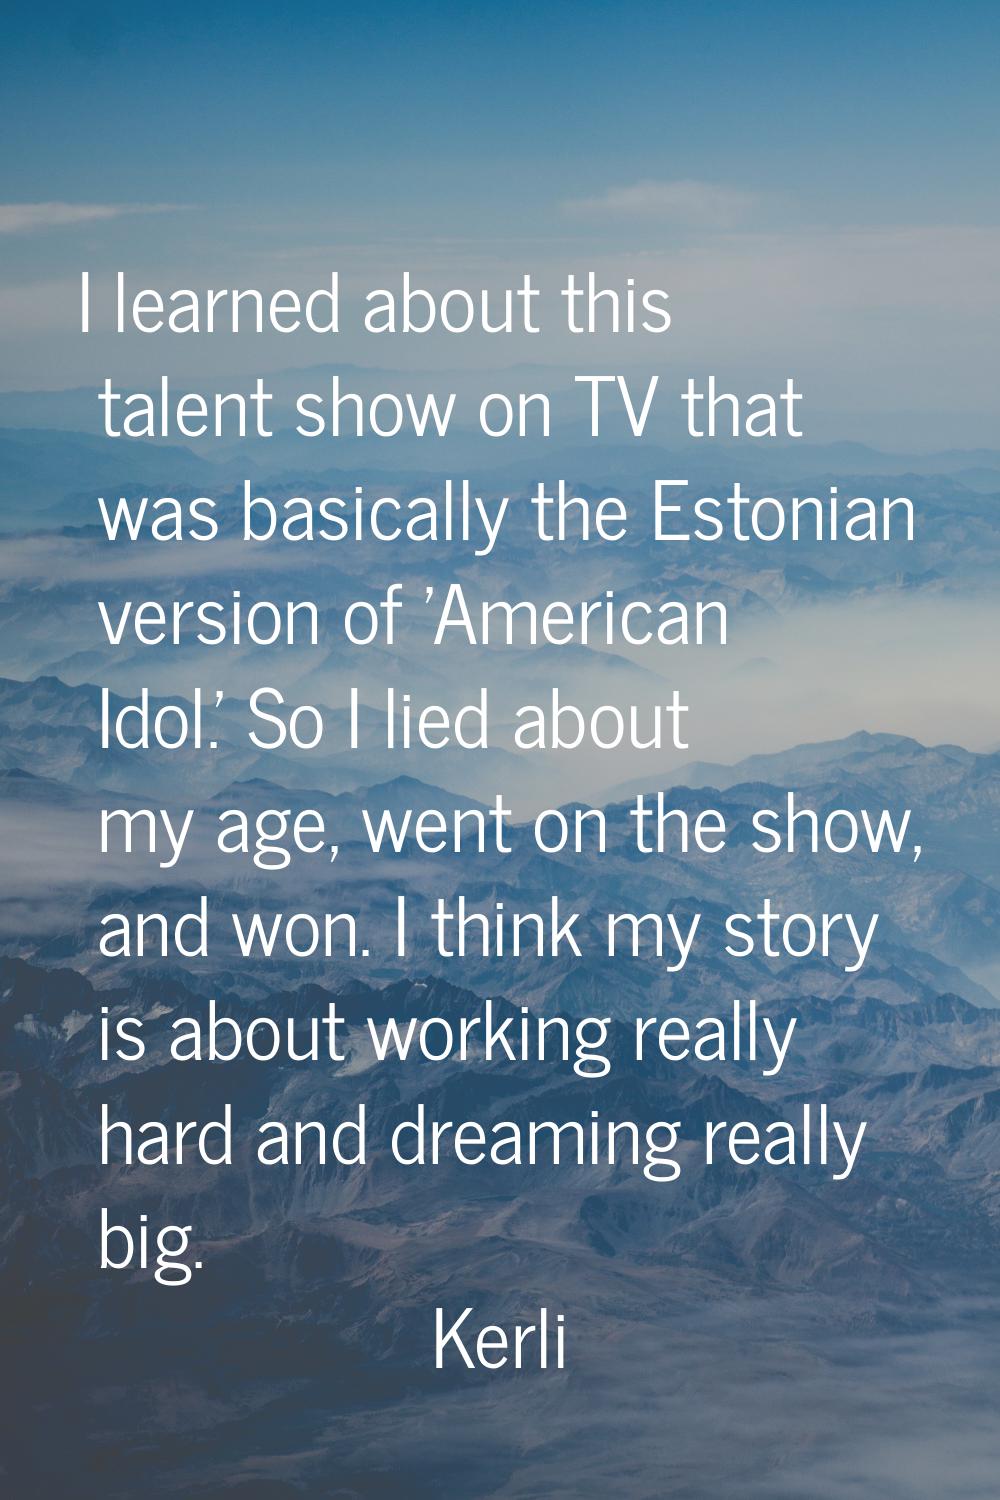 I learned about this talent show on TV that was basically the Estonian version of 'American Idol.' 